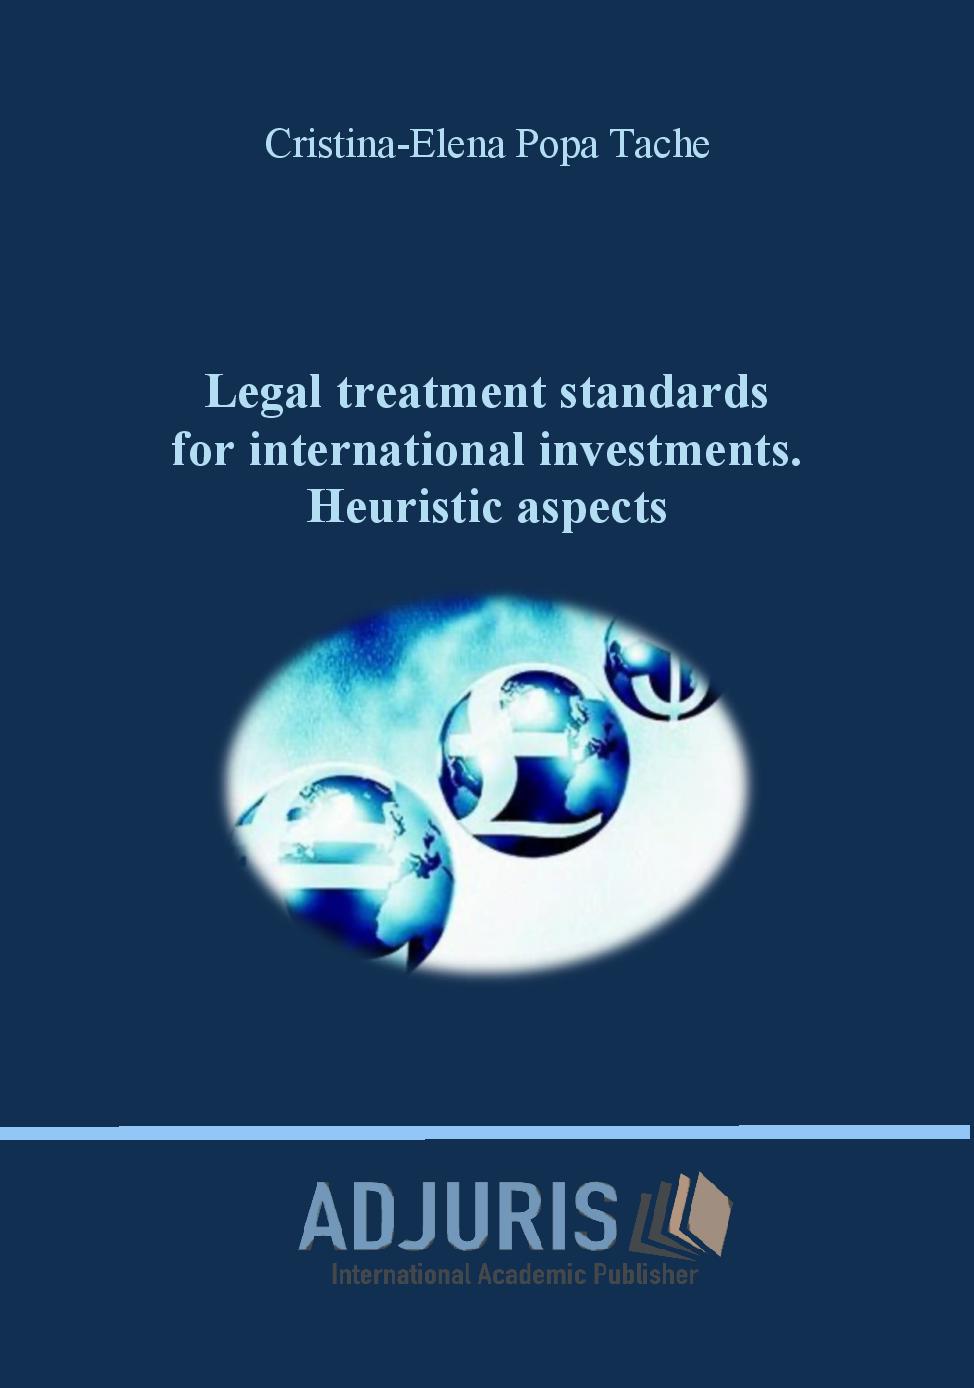 Legal treatment standards for international investments. Heuristic aspects